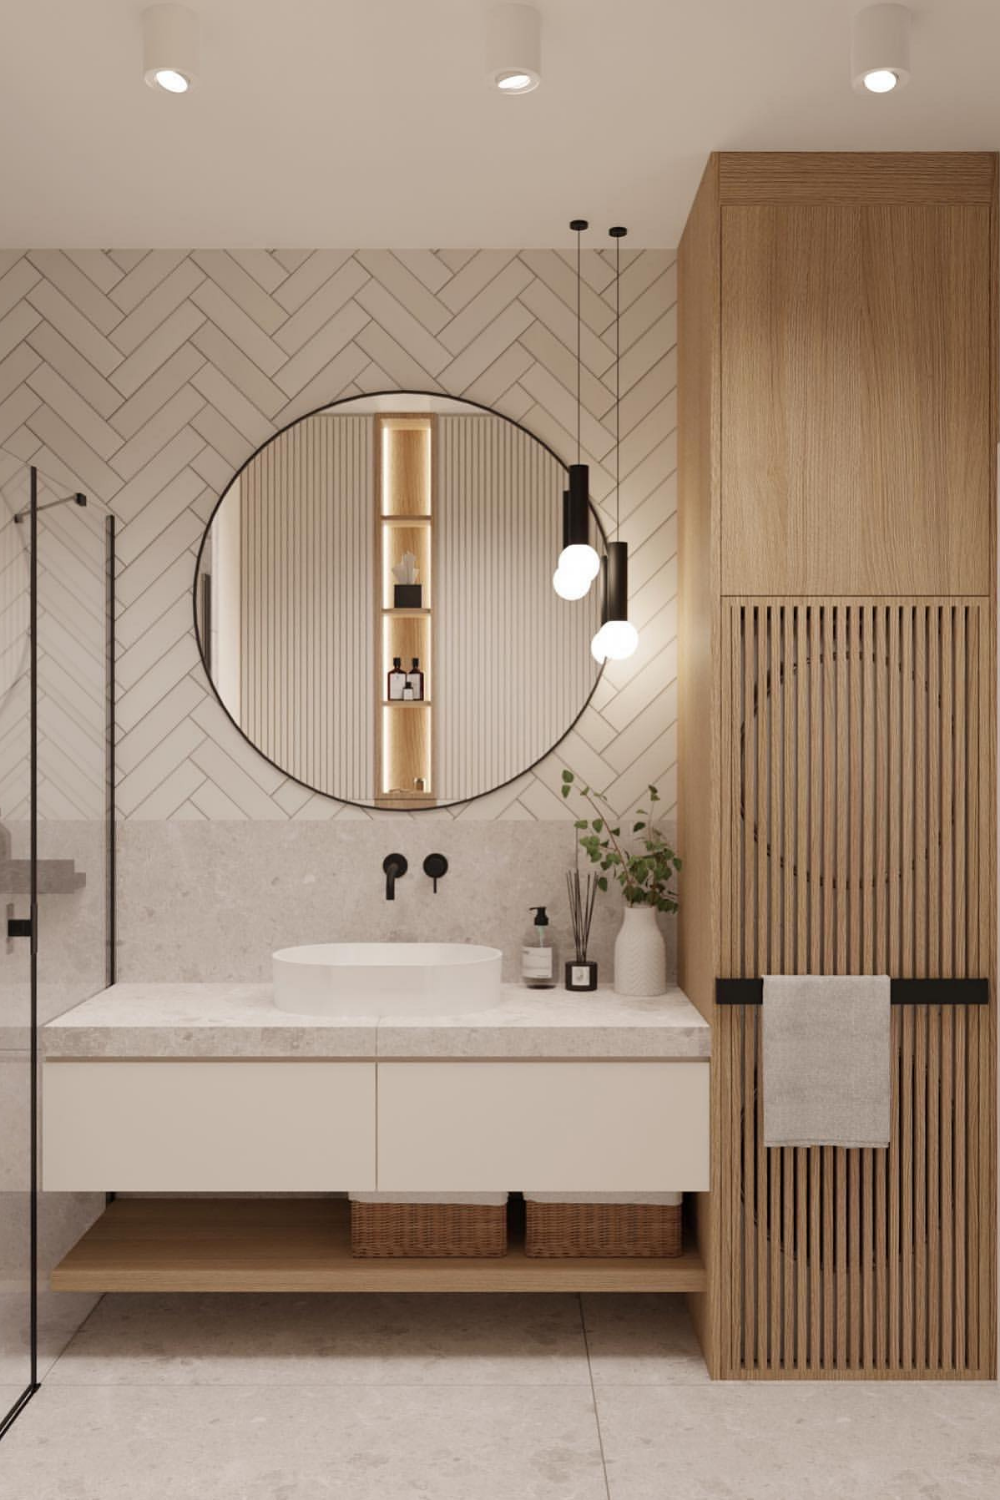 Bathroom Basins: Stylish and Functional Sinks for Your Space